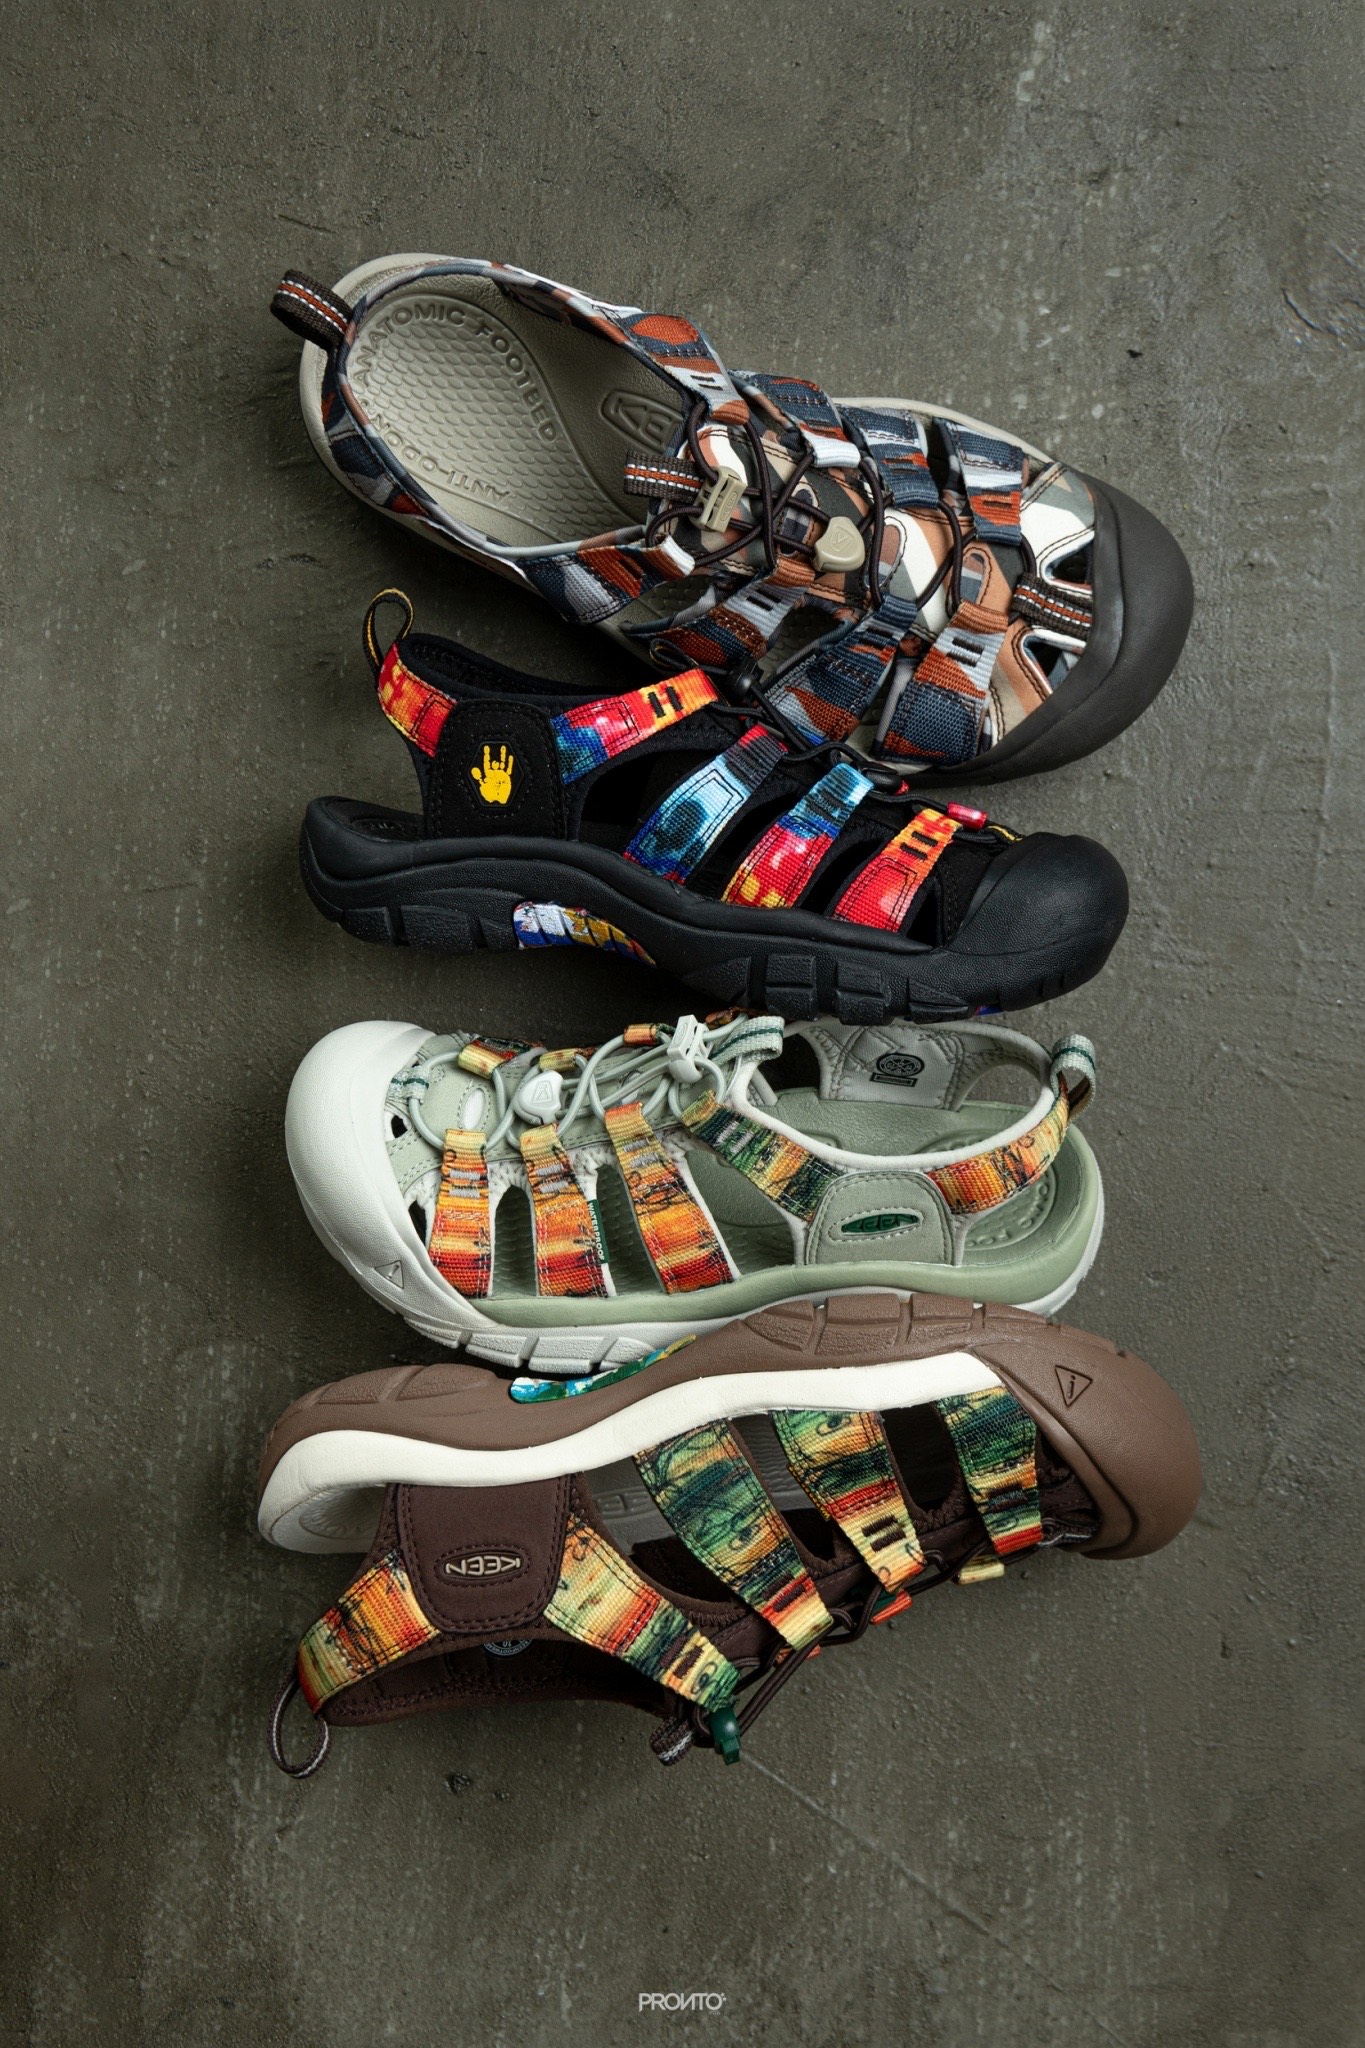 NEW ARRIVAL : KEEN